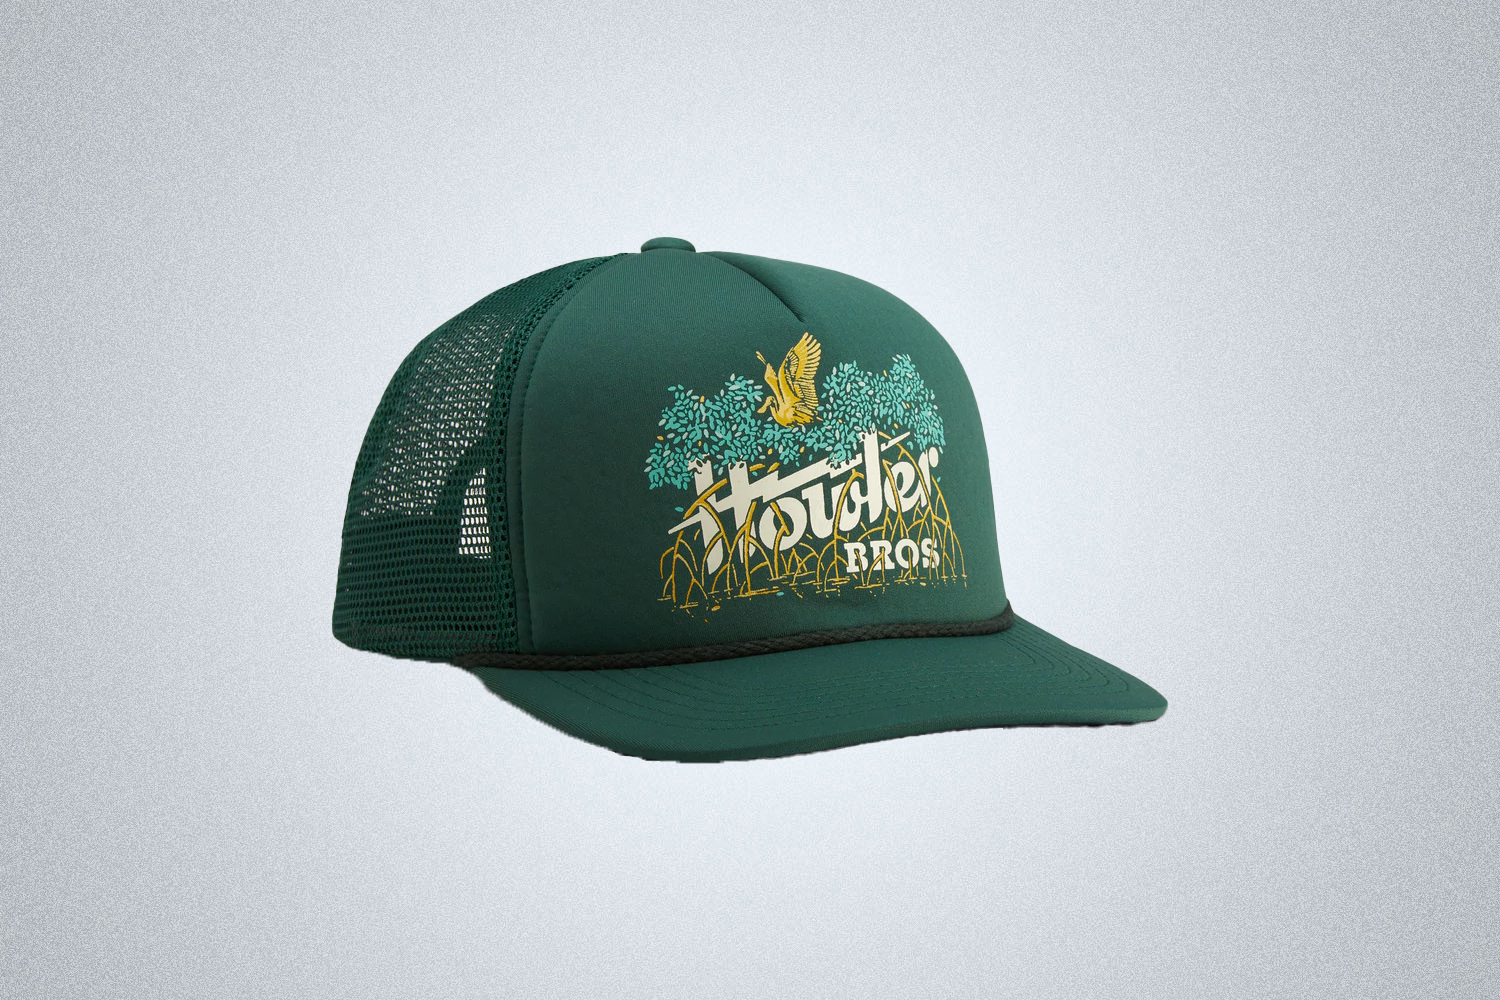 The Howler Bros Electric Mangroves Snapback is one of the best hats for fly fishing in 2022